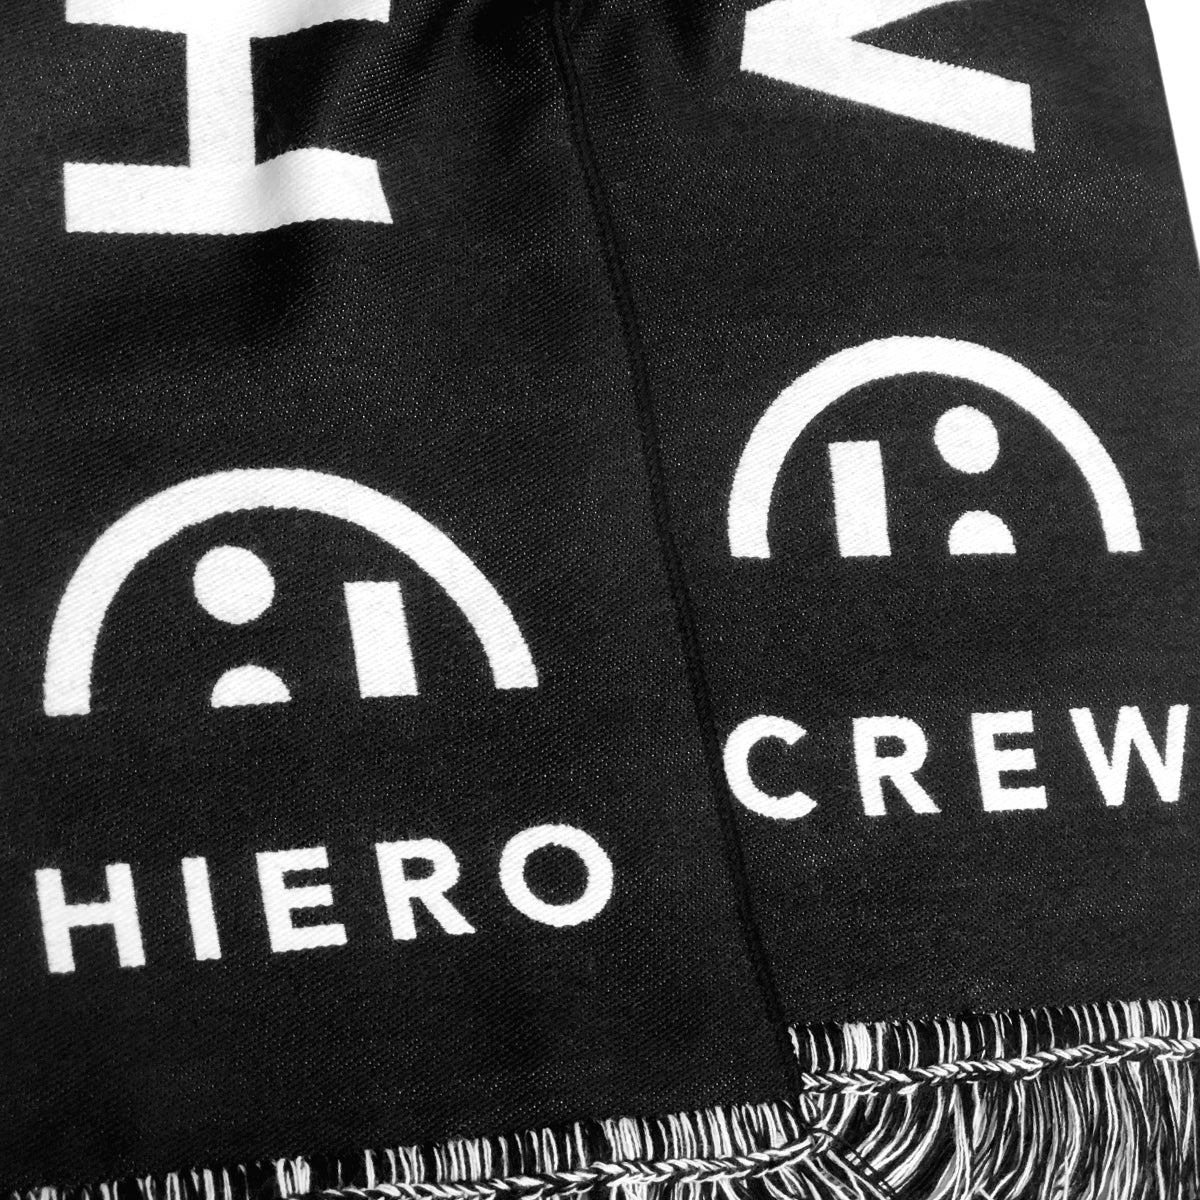 Detailed close-up of HIERO and CREW wordmarks on the two ends of a black woven scarf.